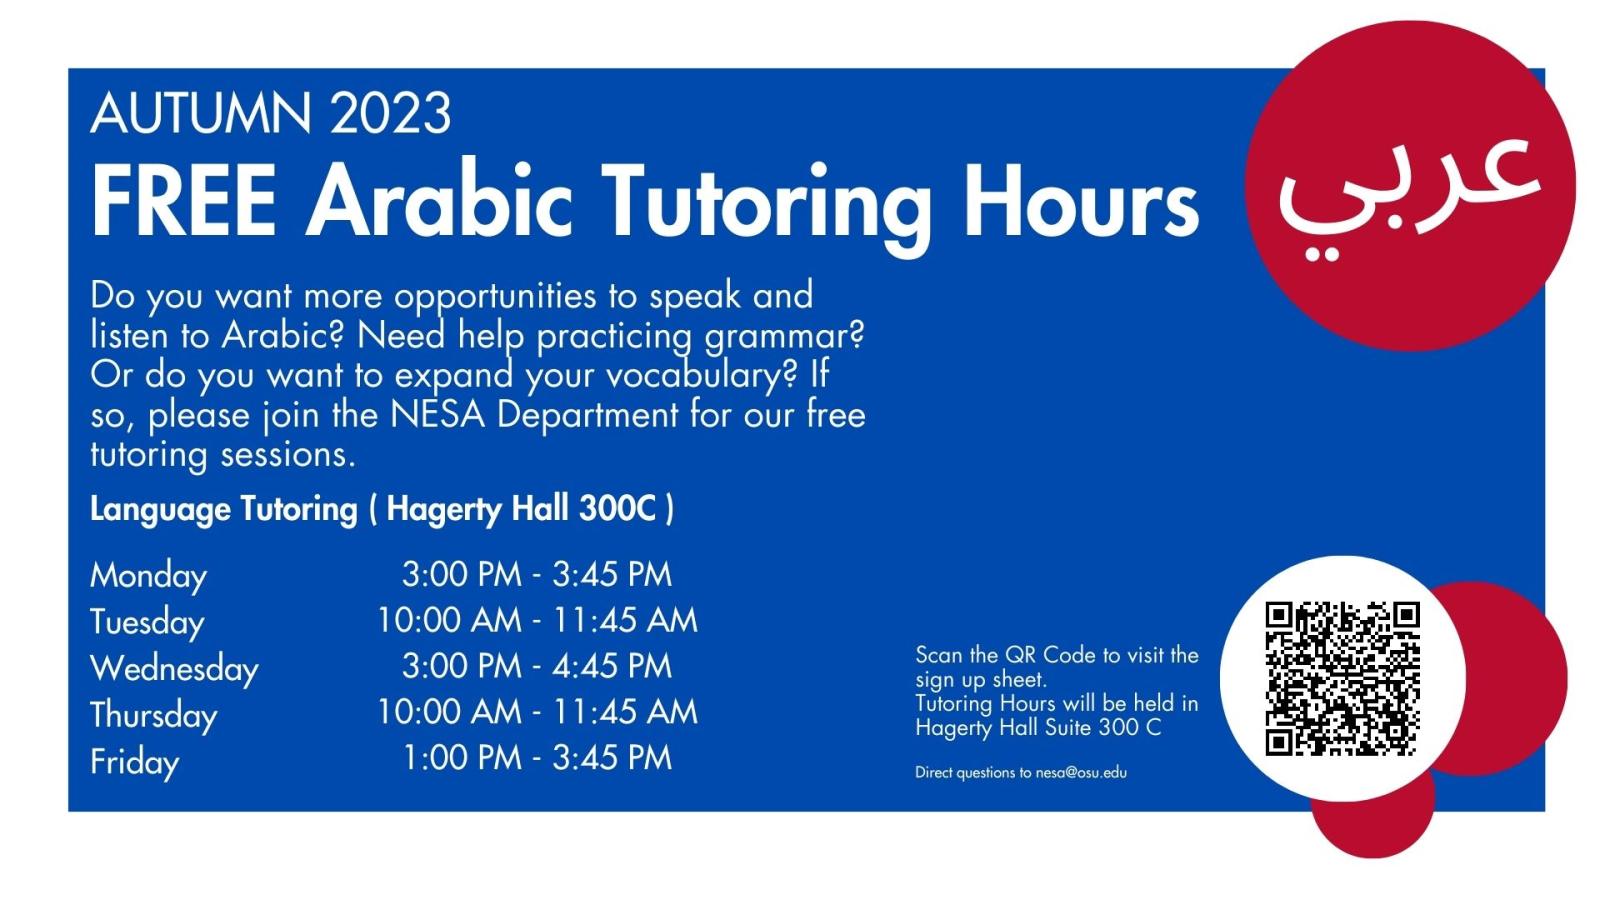 Resources to learn and foster Arabic - Ute's International Lounge & Academy